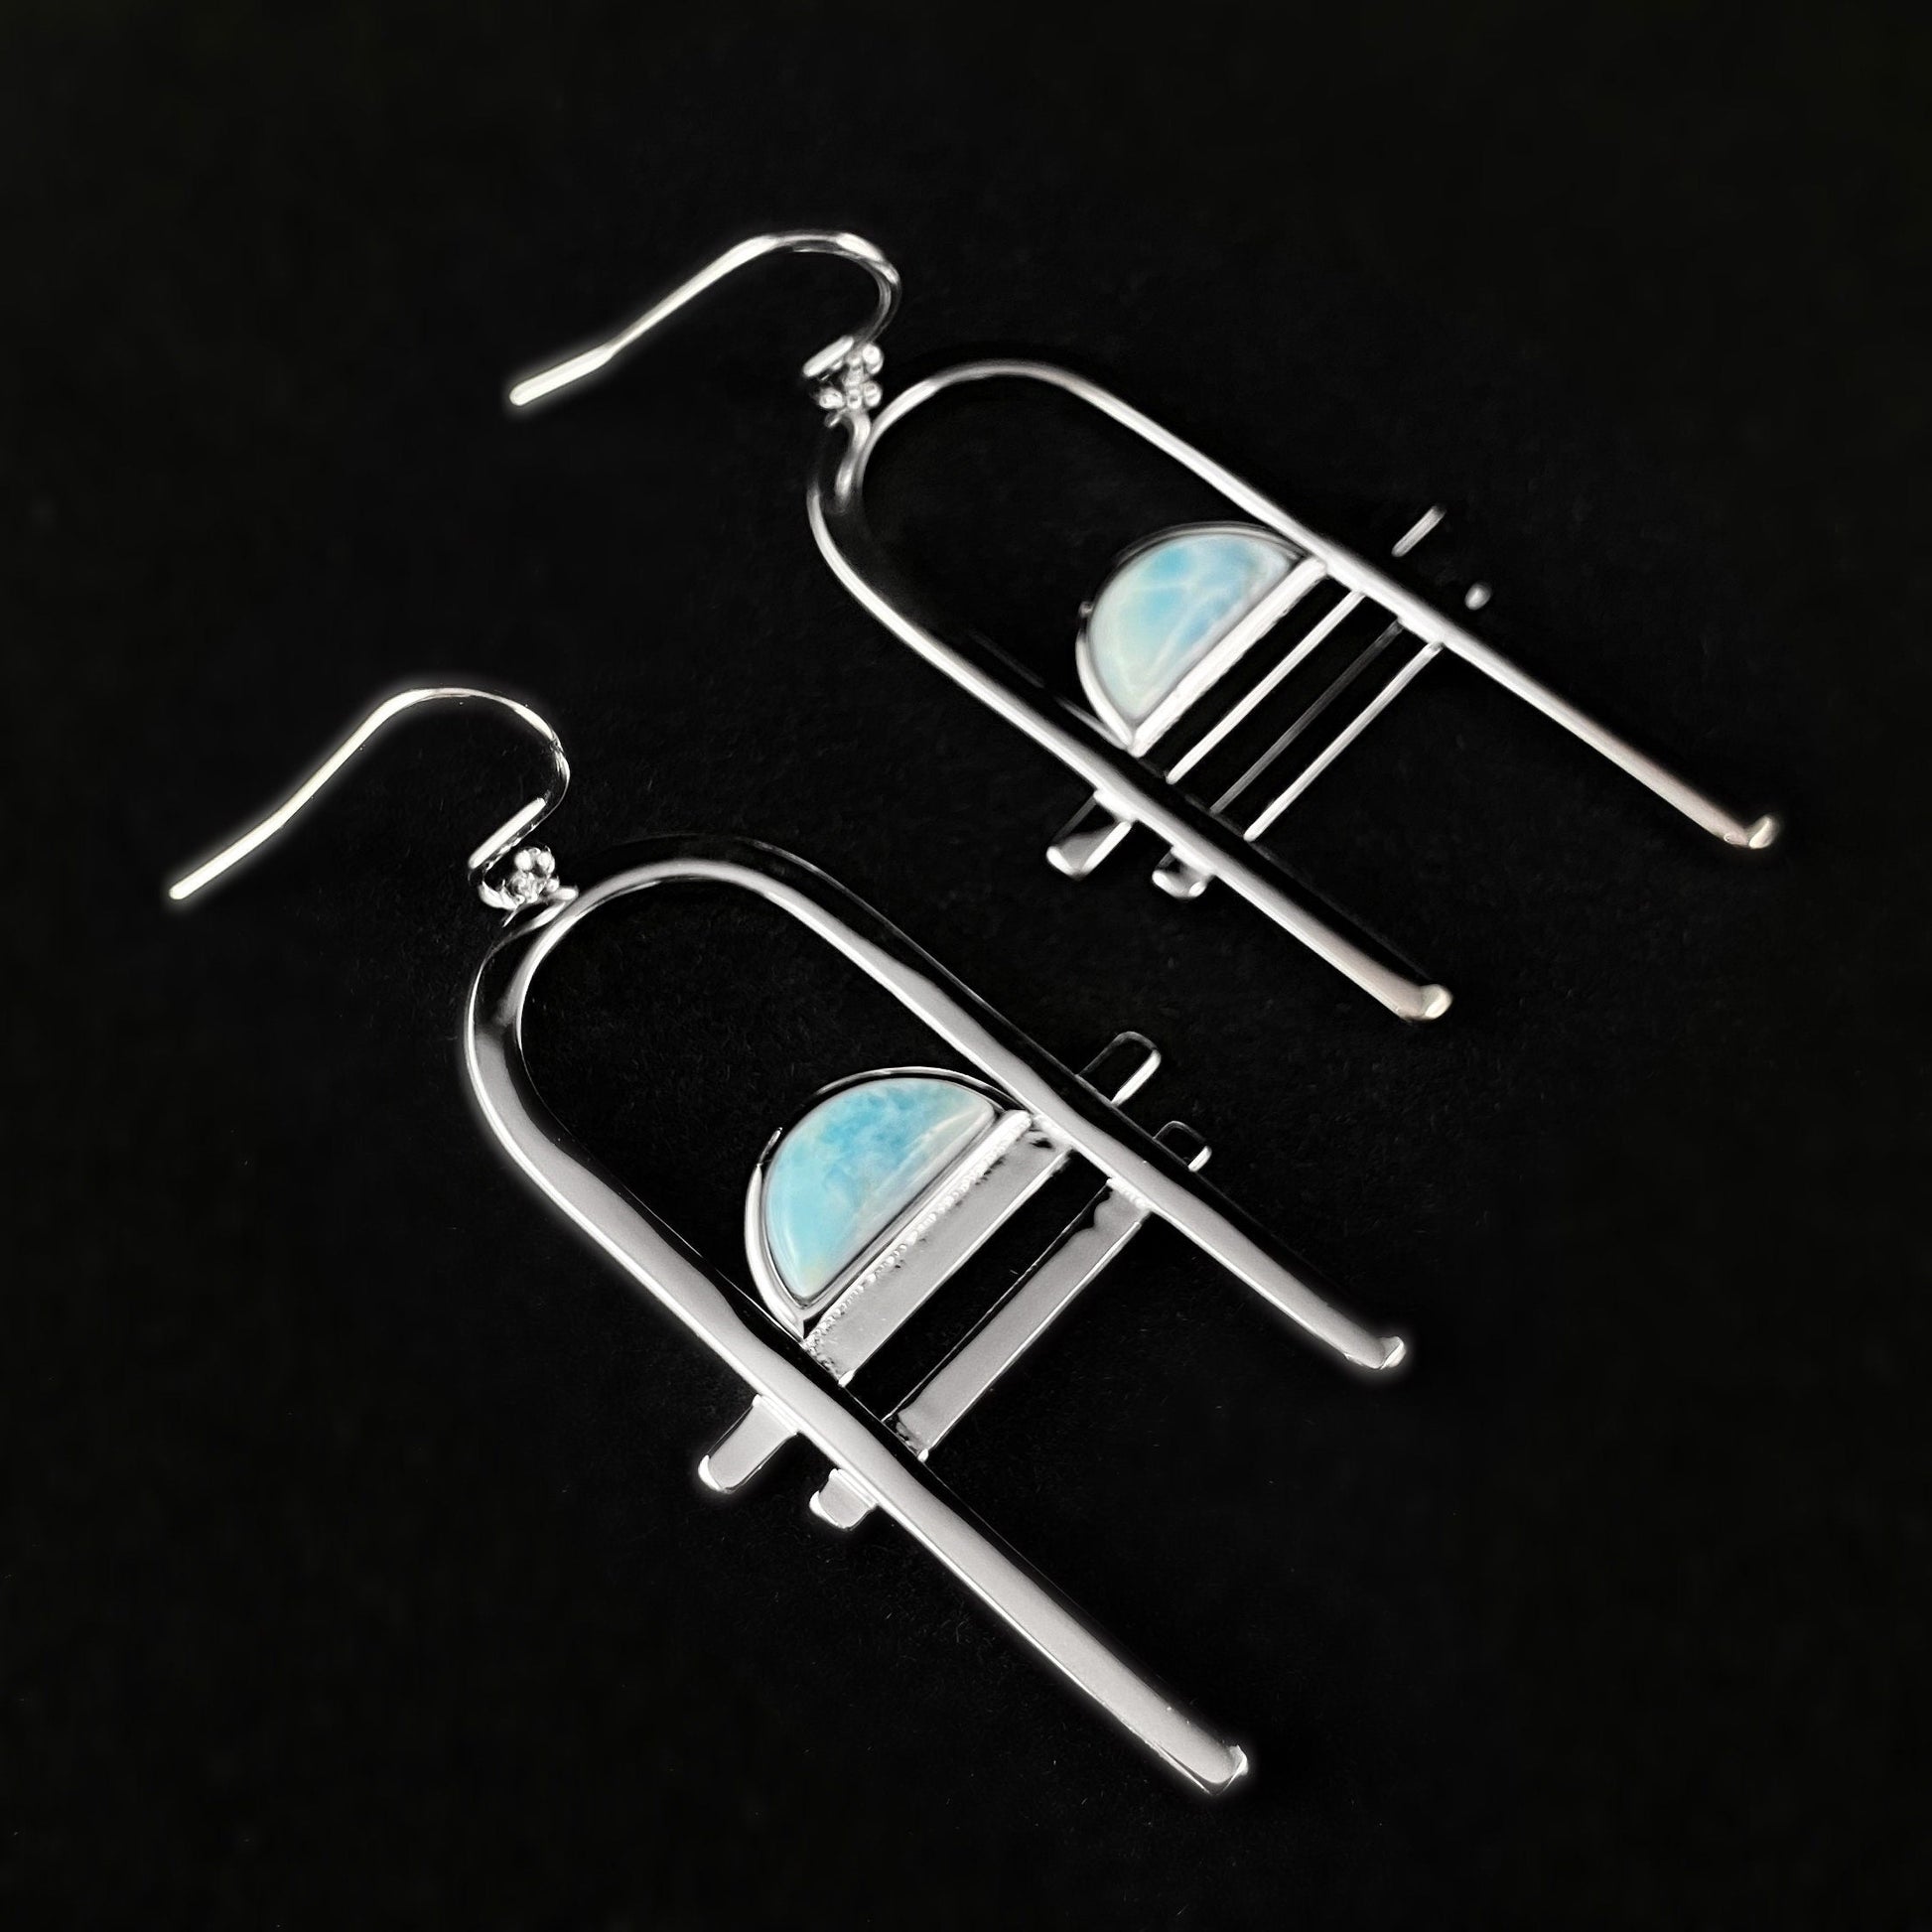 1920s Silver Abstract Statement Earrings with Blue Larimar Stone Accents - Carlyle